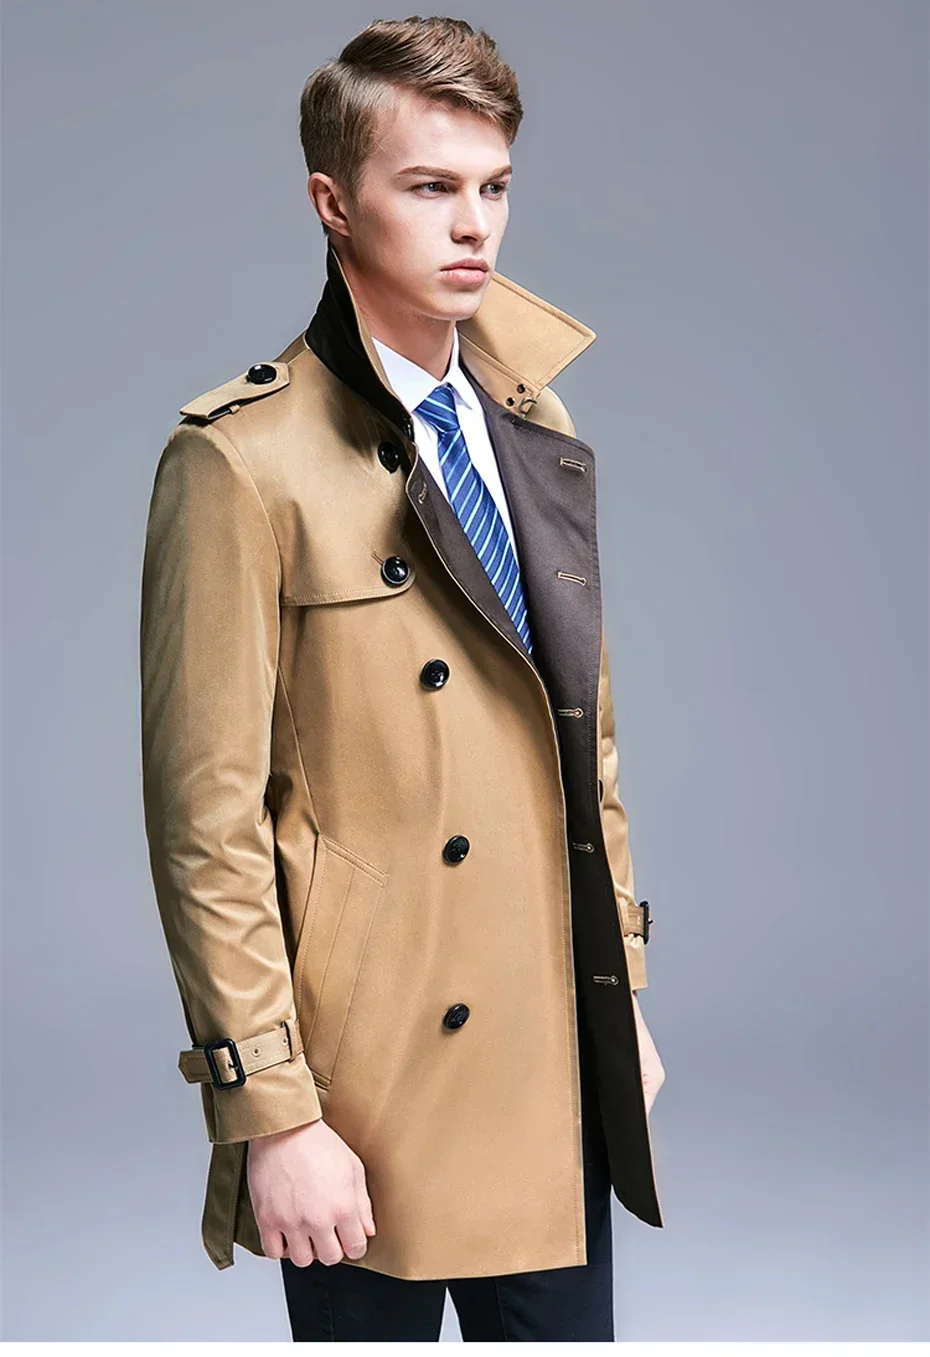 

Spring New Trench Coat Men Fashion Lapel British Windbreaker Men's Long Double-breasted Trench Coat S-6XL Size Chaqueta Hombre